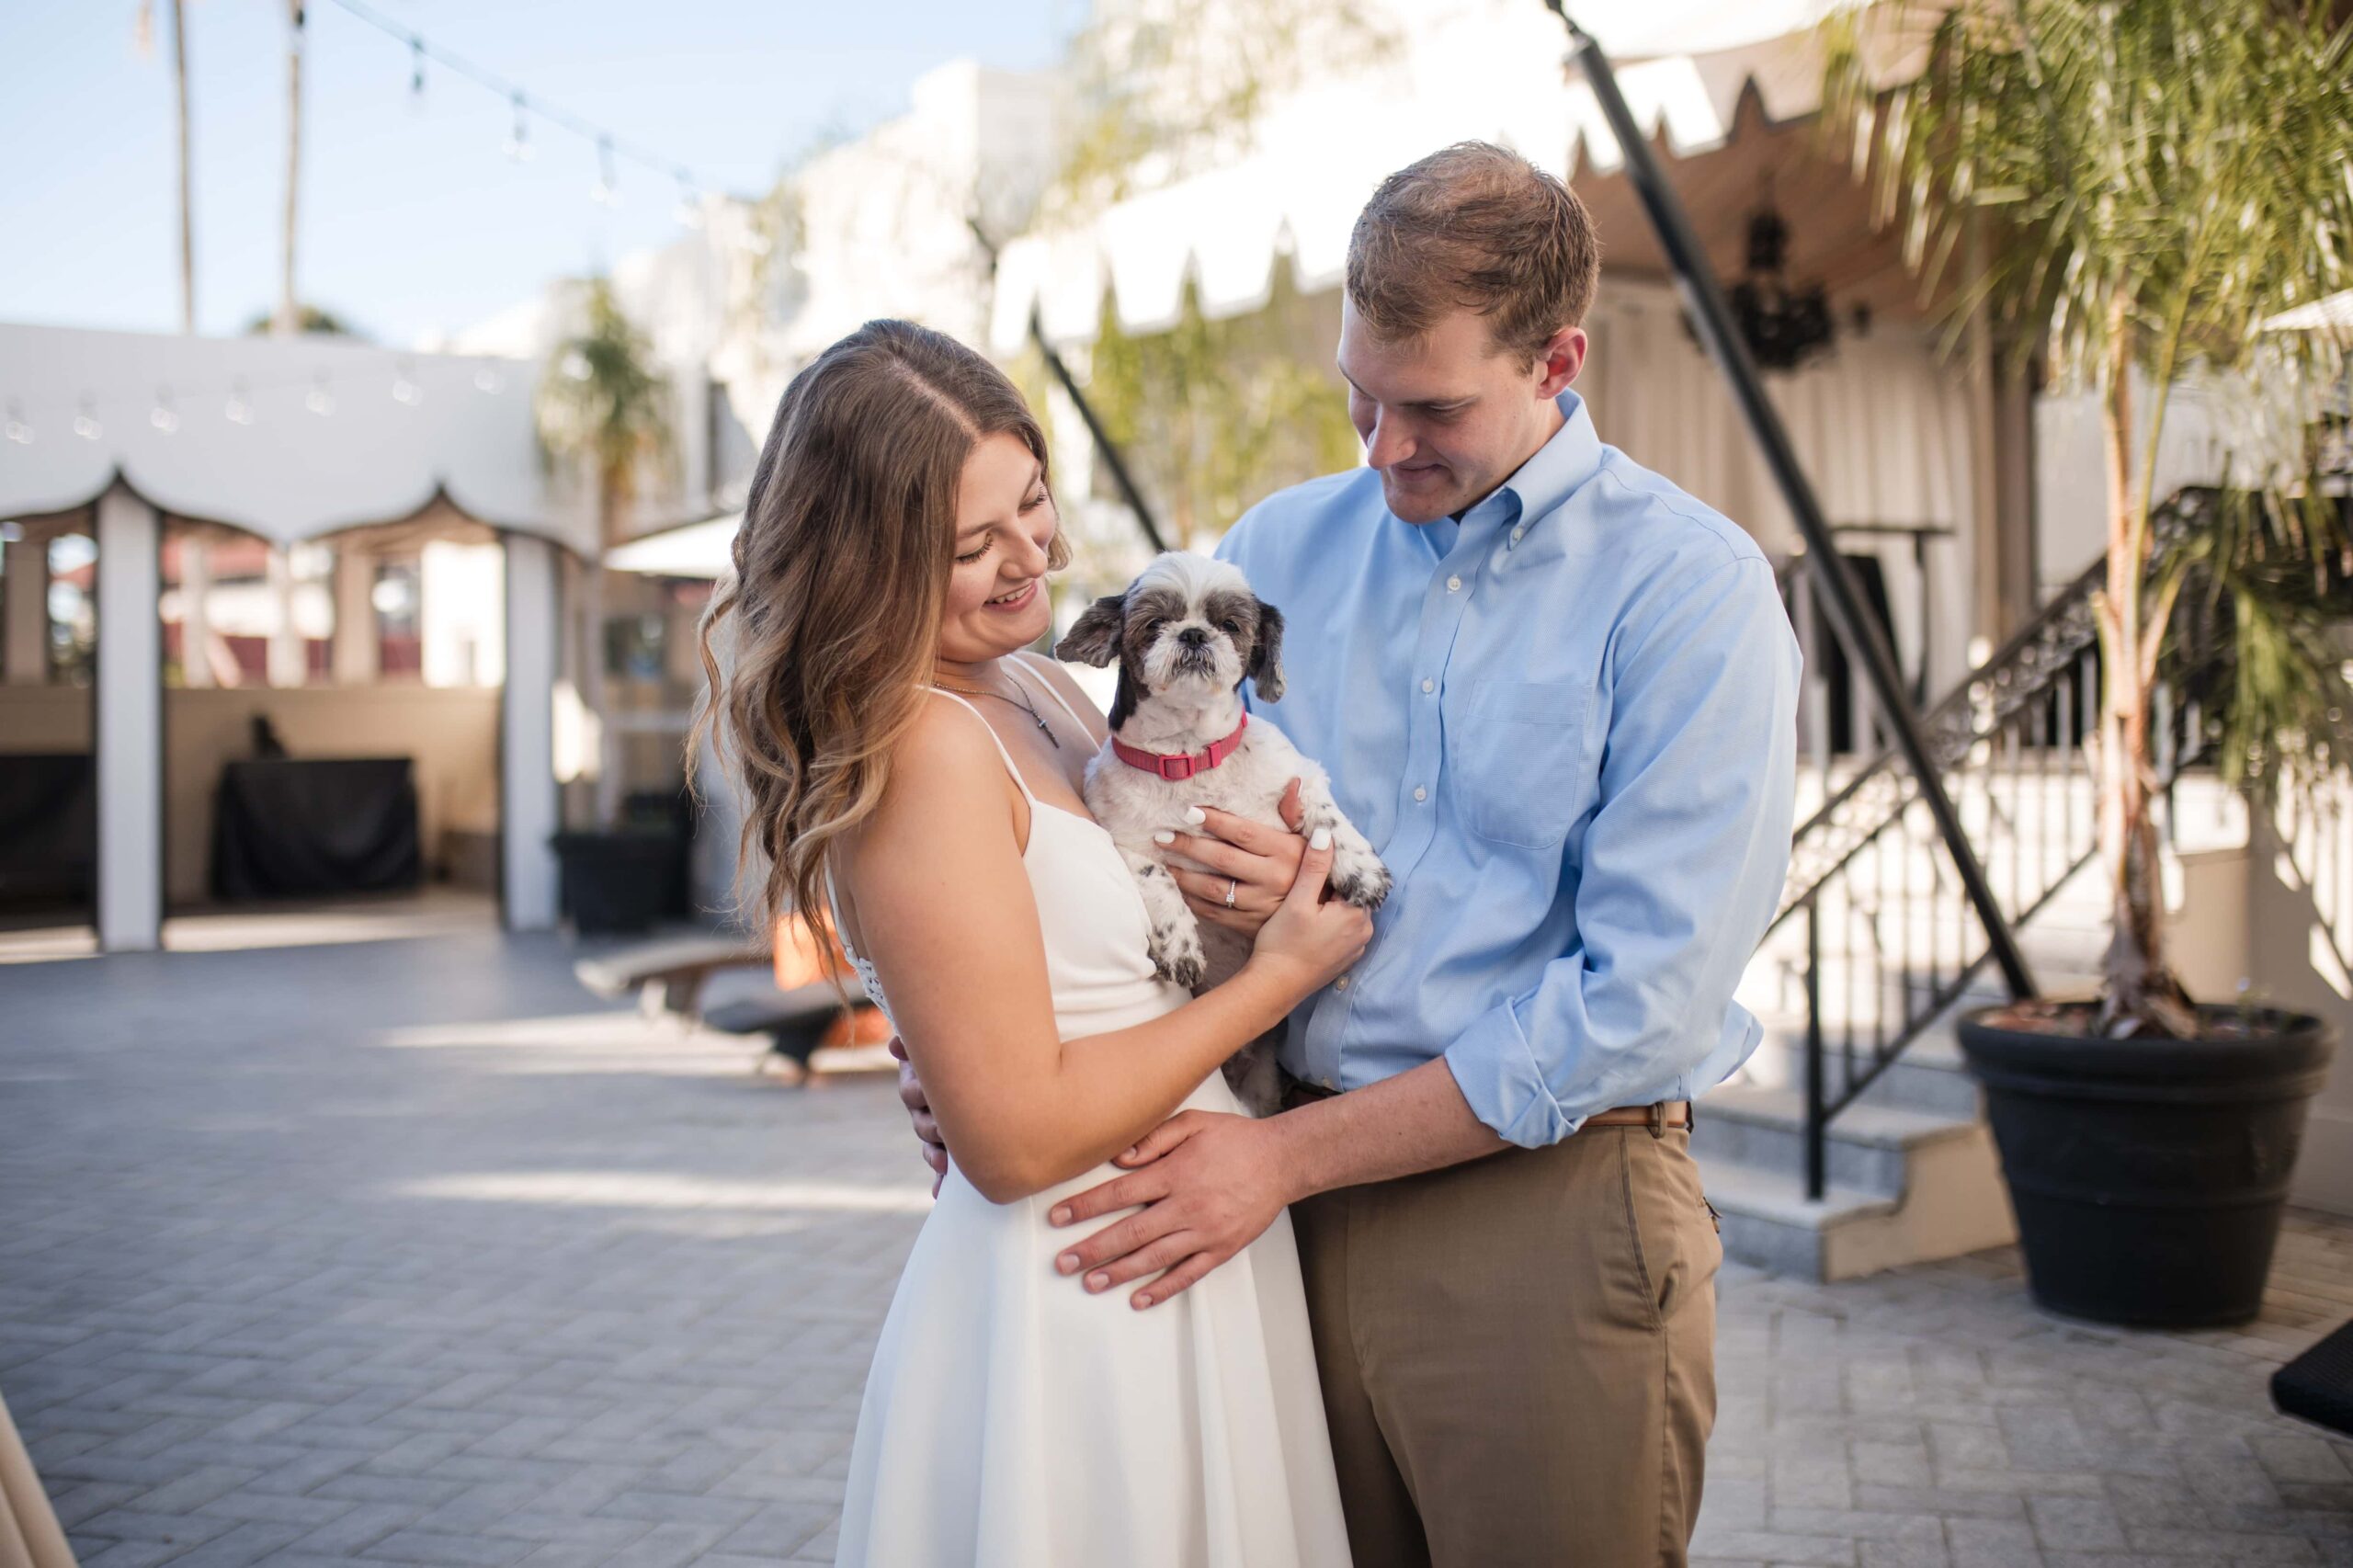 Couple included their puppy in their engagement photos. Photos taken in St. Augustine by Phavy Photography